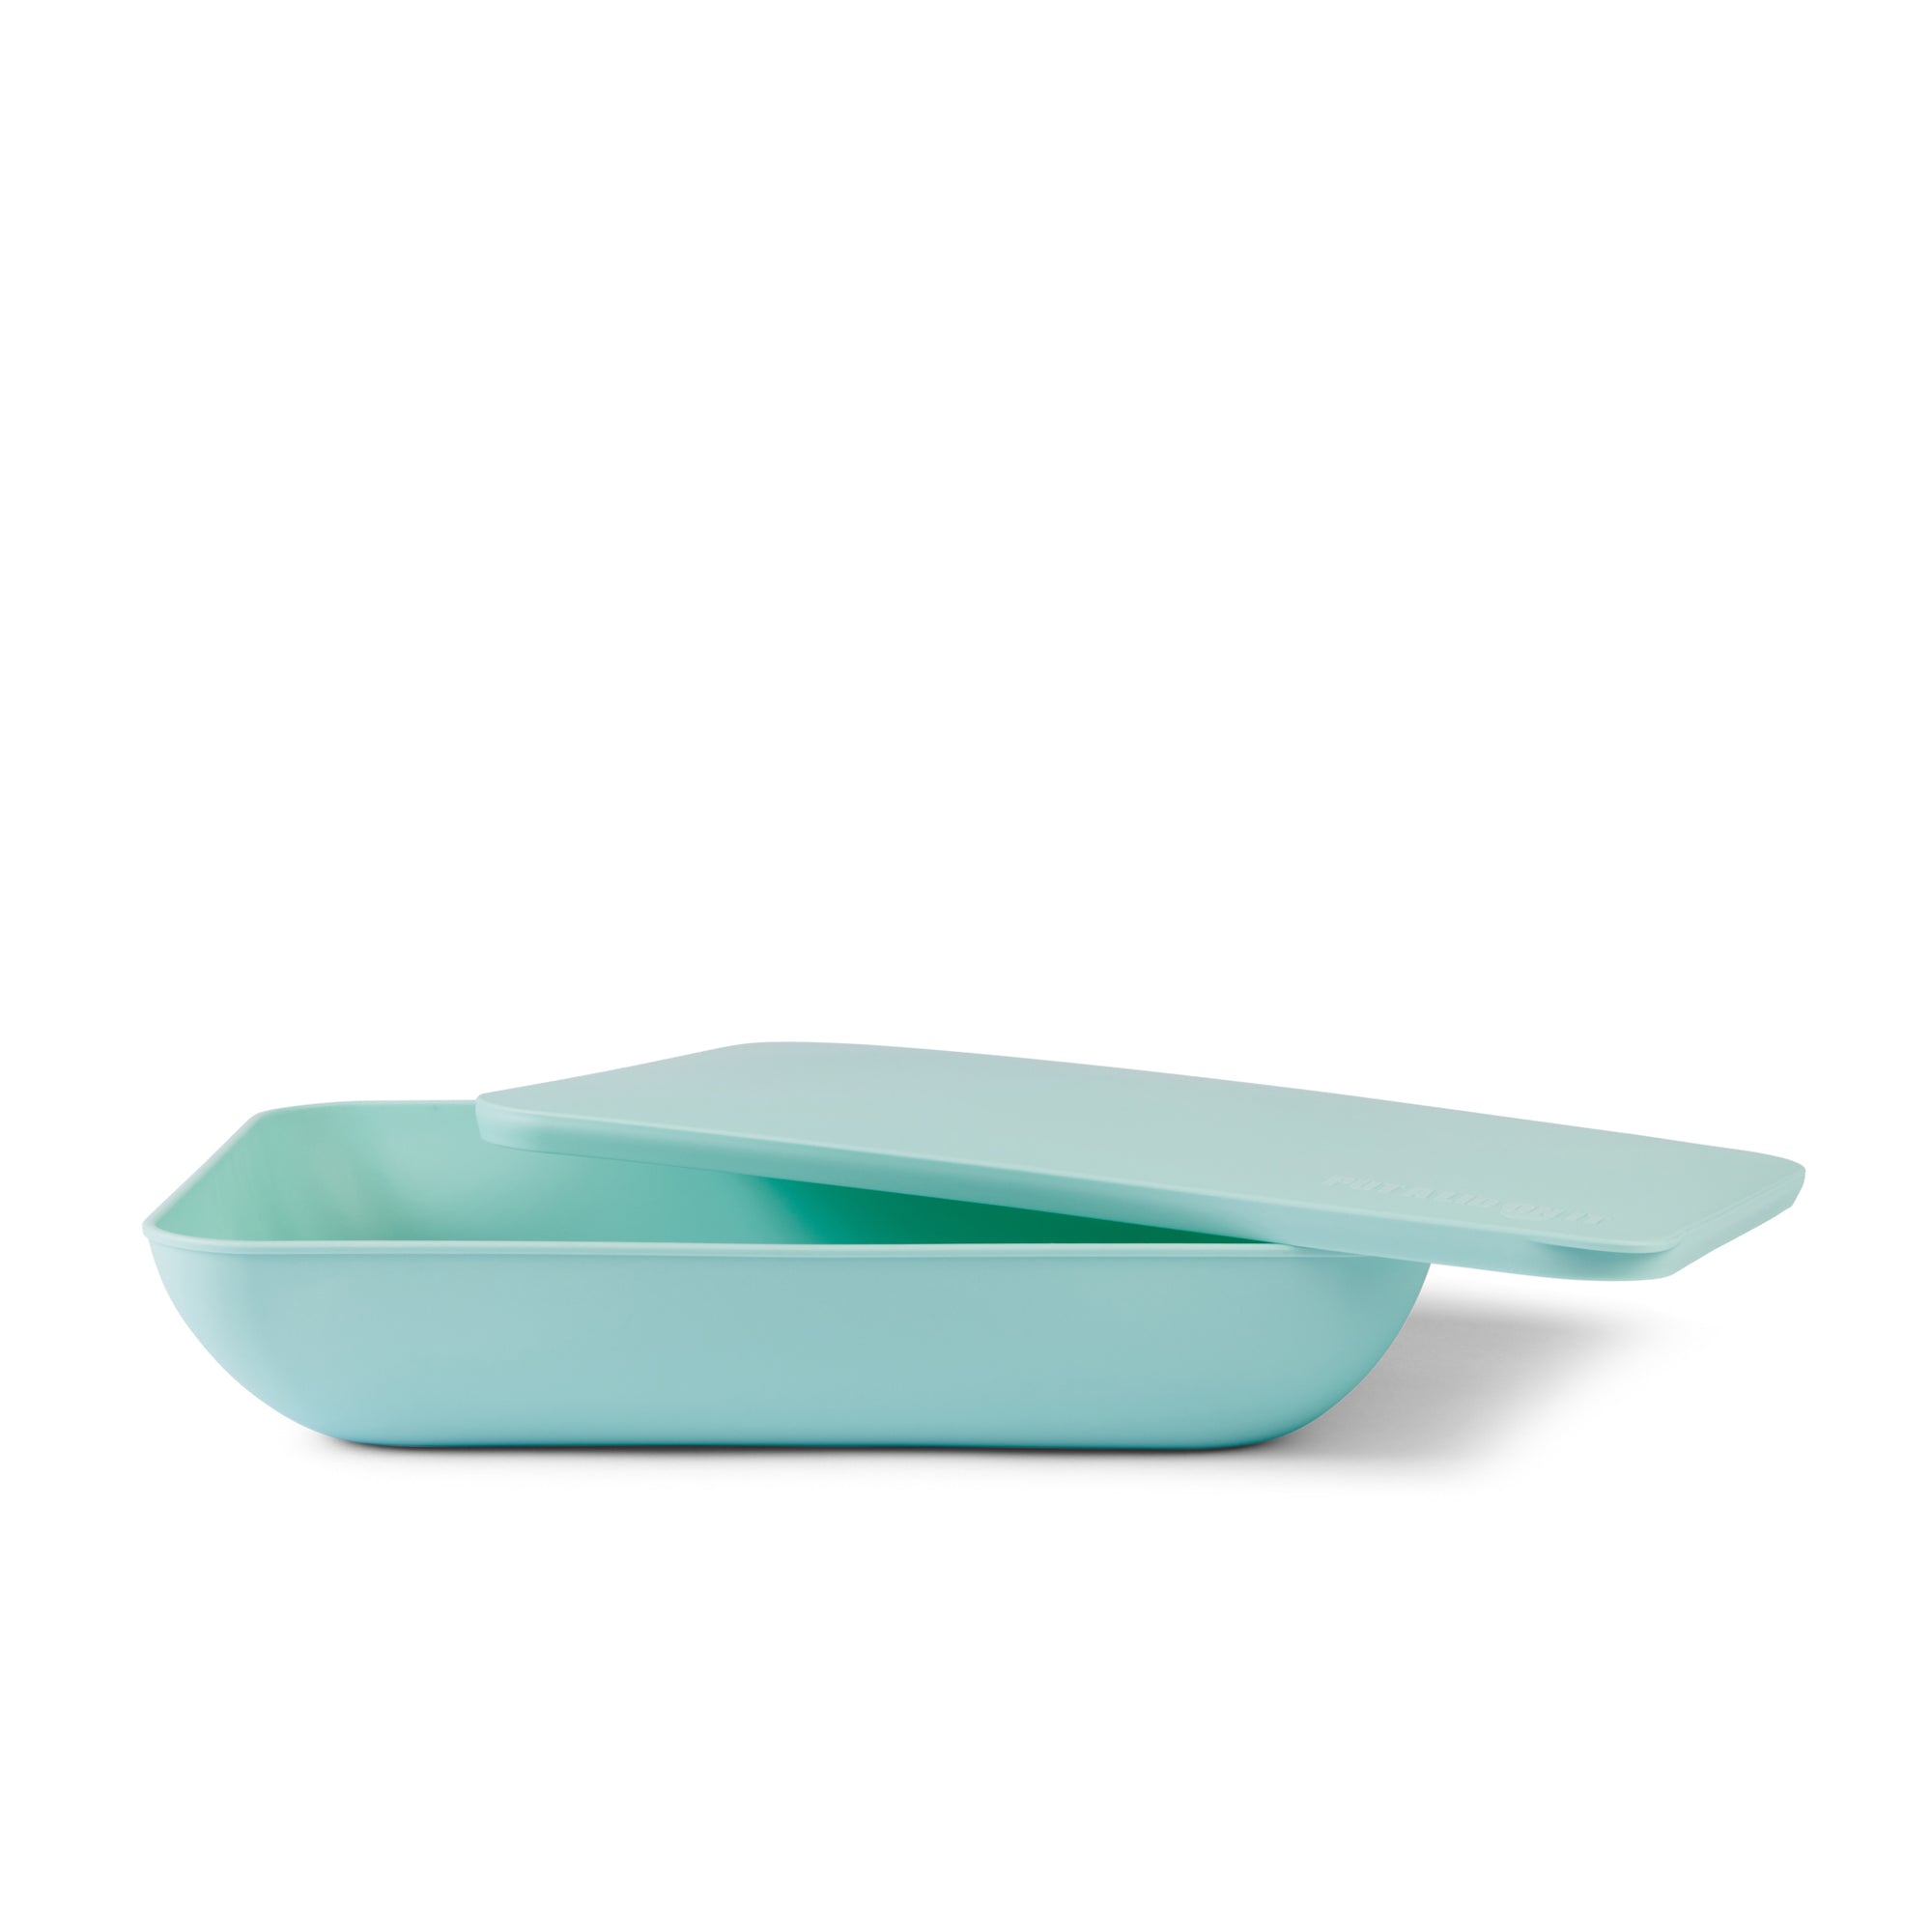 Put a lid on it - Serving platter with a lid - Mint